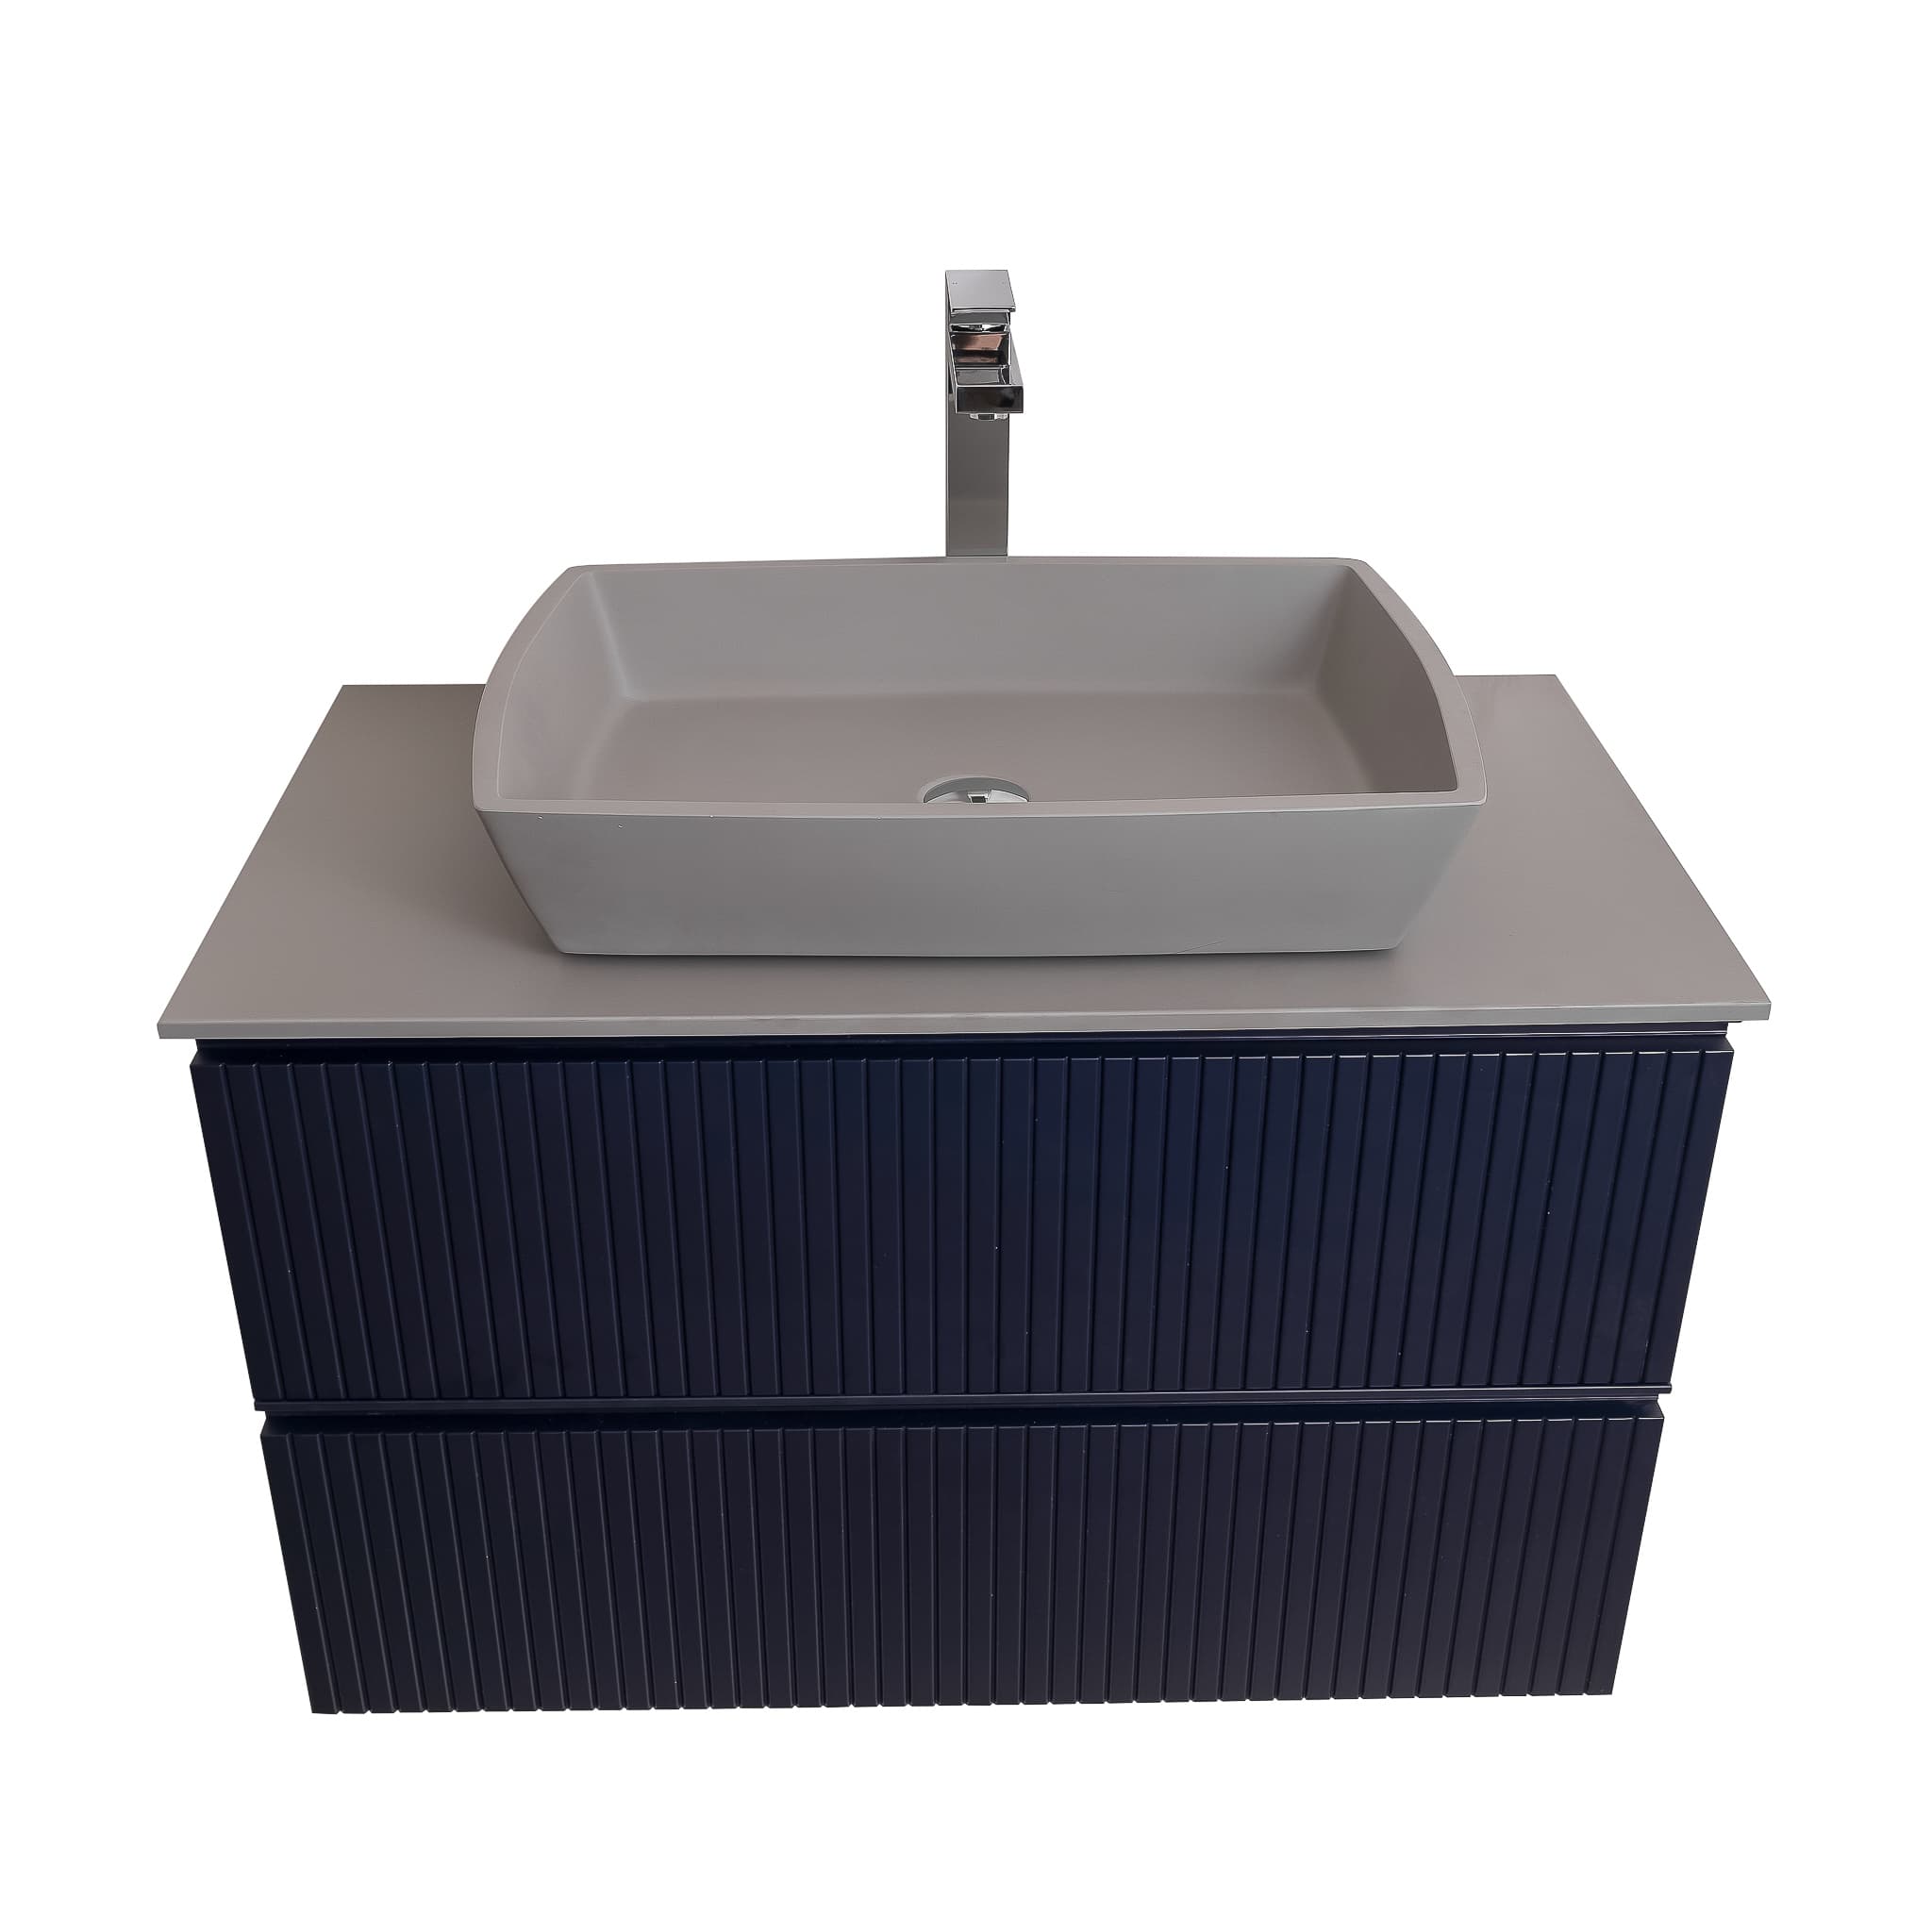 Ares 31.5 Matte Navy Blue Cabinet, Solid Surface Flat Grey Counter And Square Solid Surface Grey Basin 1316, Wall Mounted Modern Vanity Set